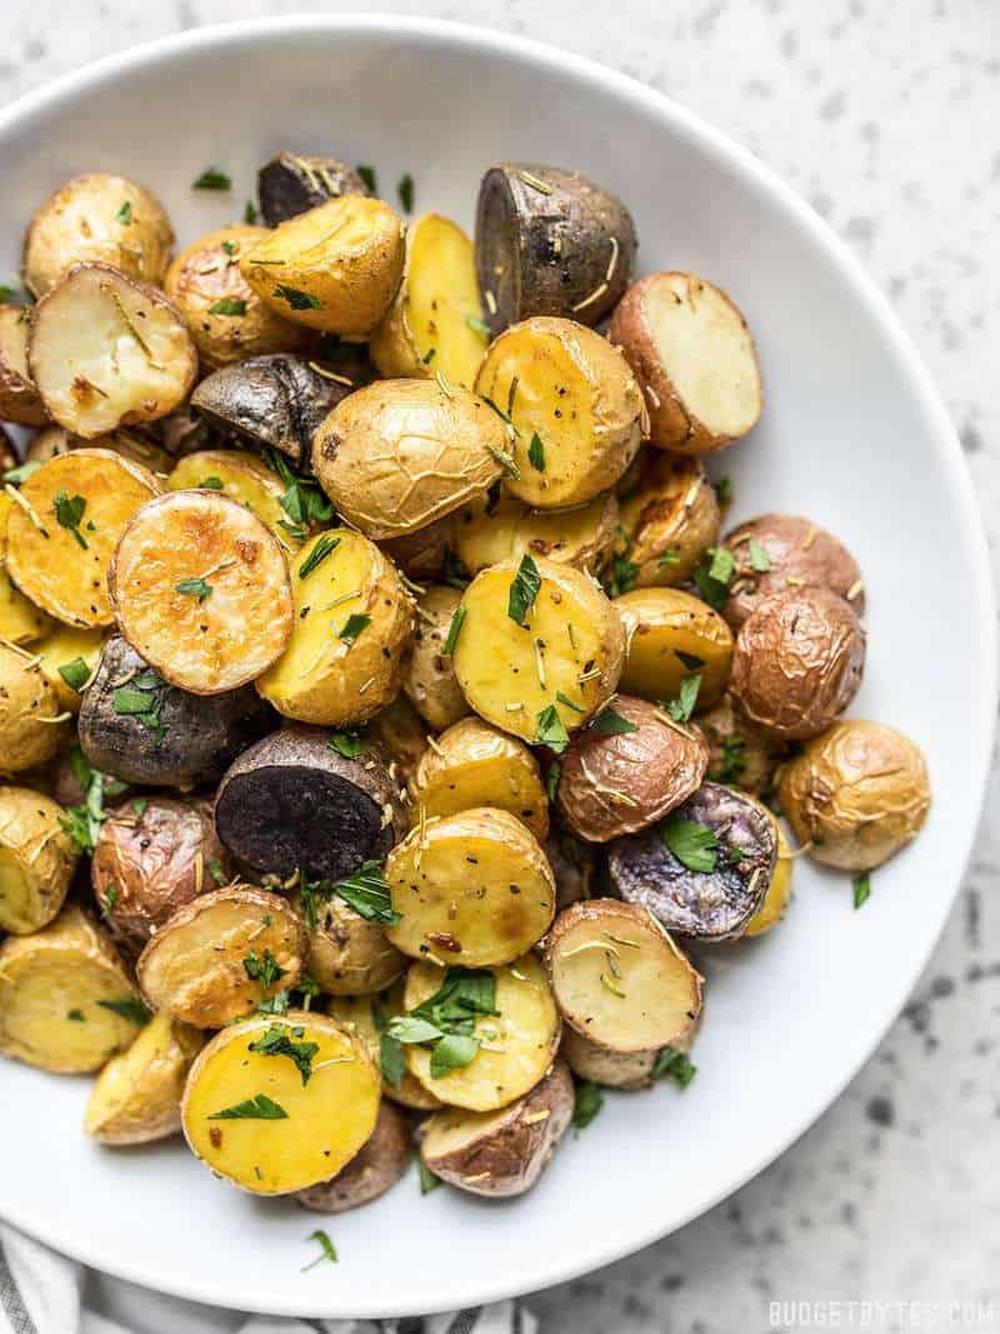 Rosemary roasted potatoes most popular thanksgiving side dishes 